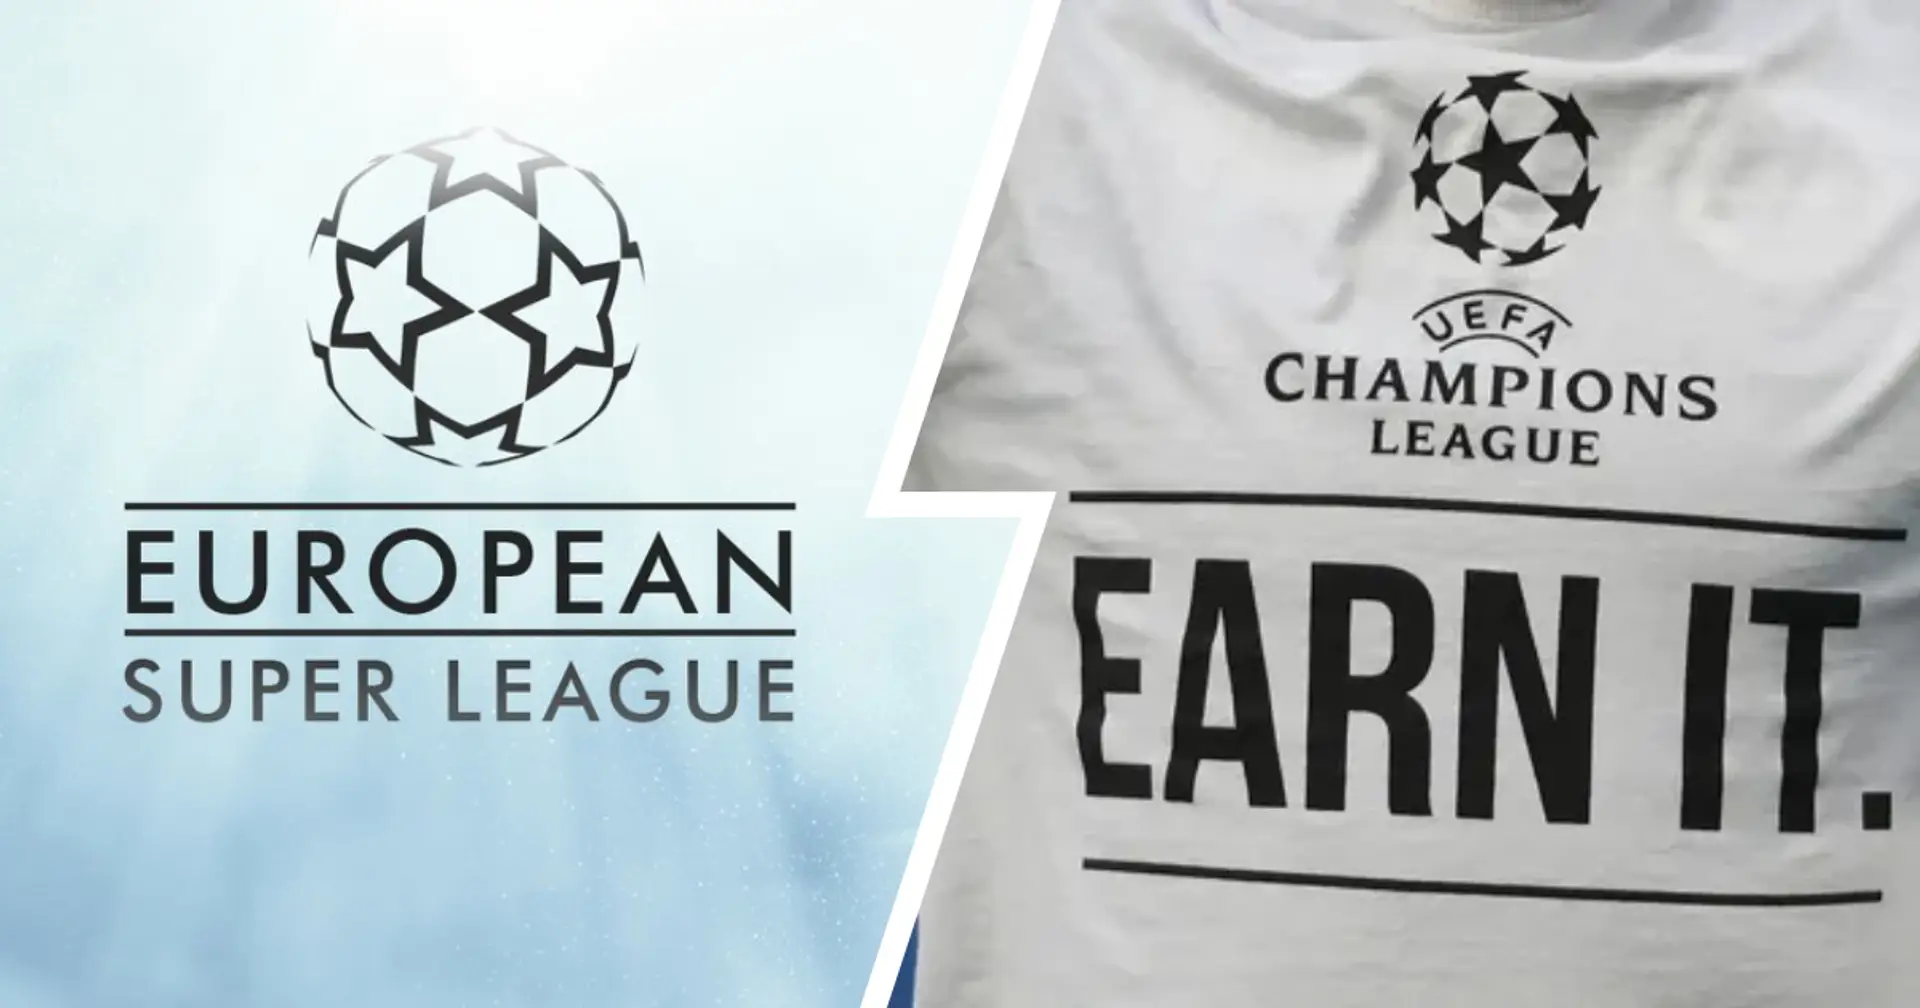 New European Super League announced, aimed to replace Champions League — explained